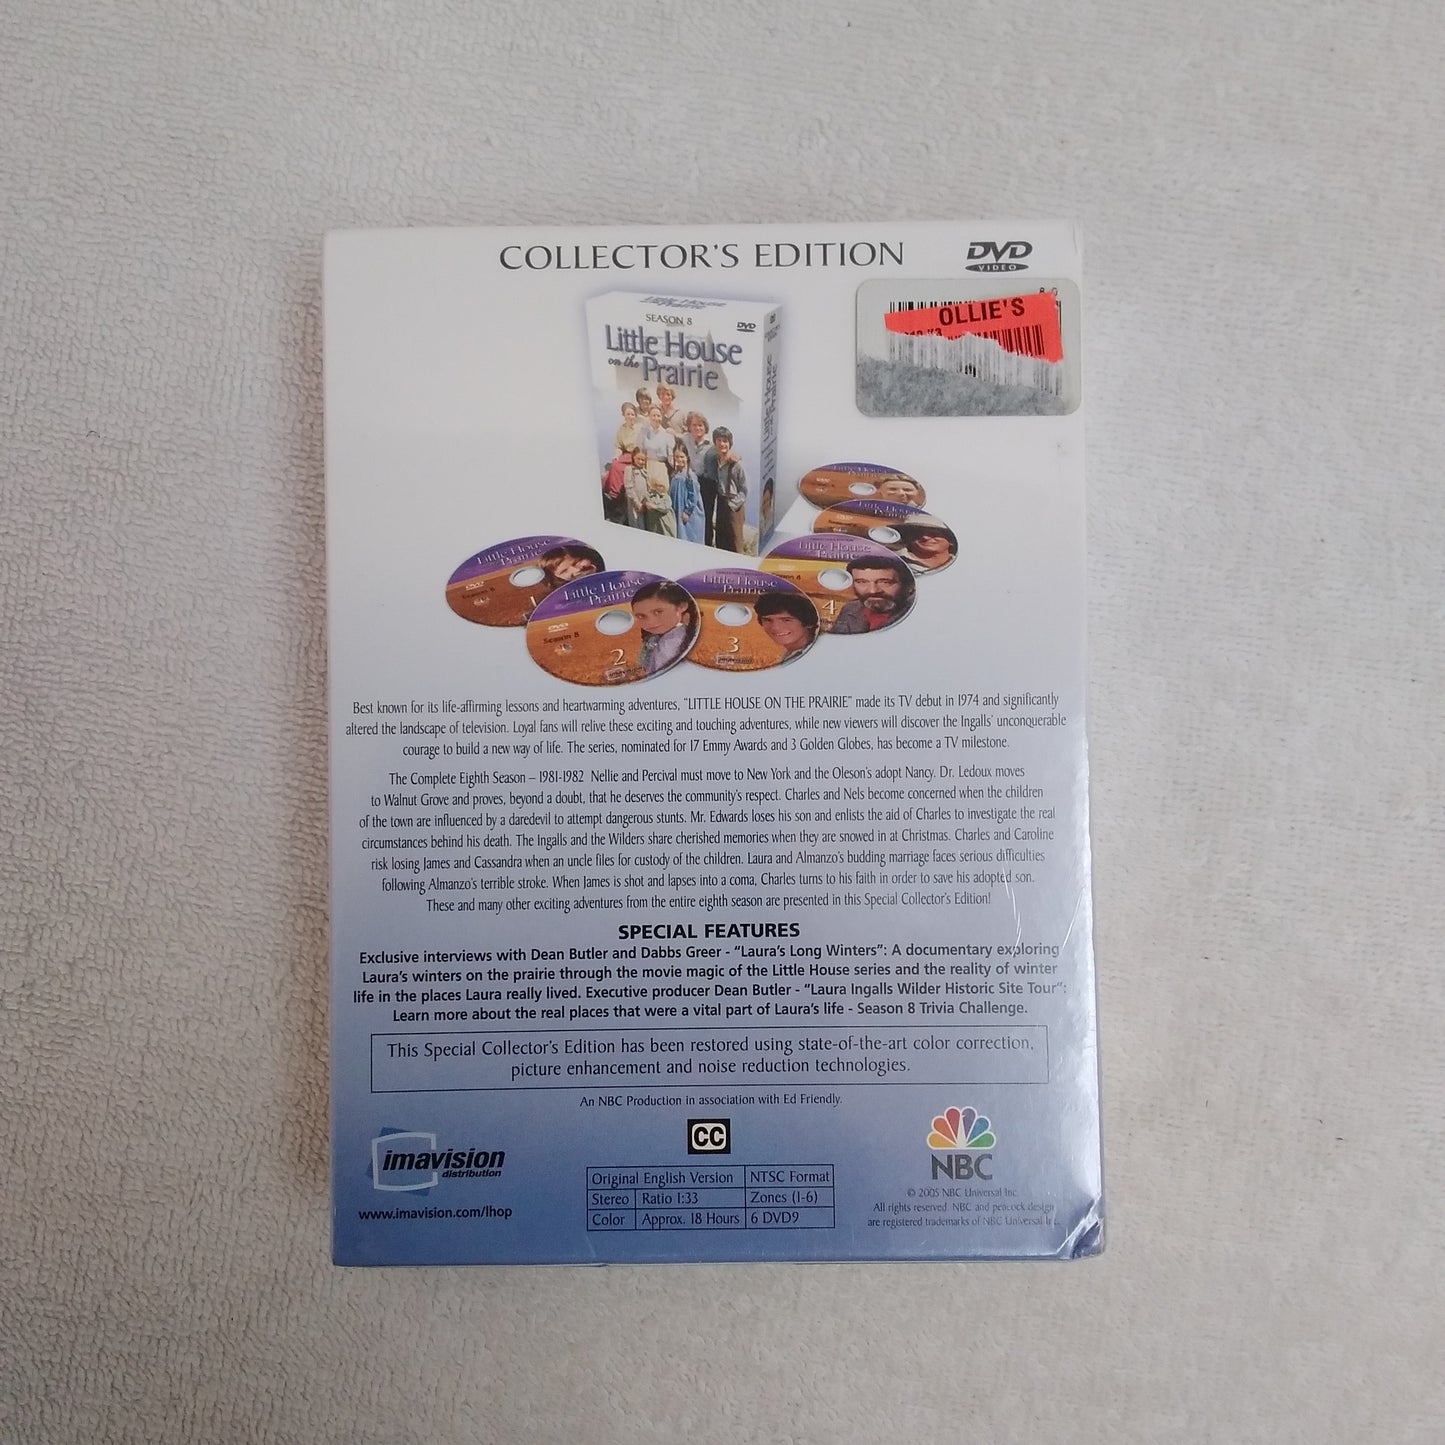 UNOPENED -- Little House on the Prairie, Season 8, Remastered Collector's Edition DVD Set